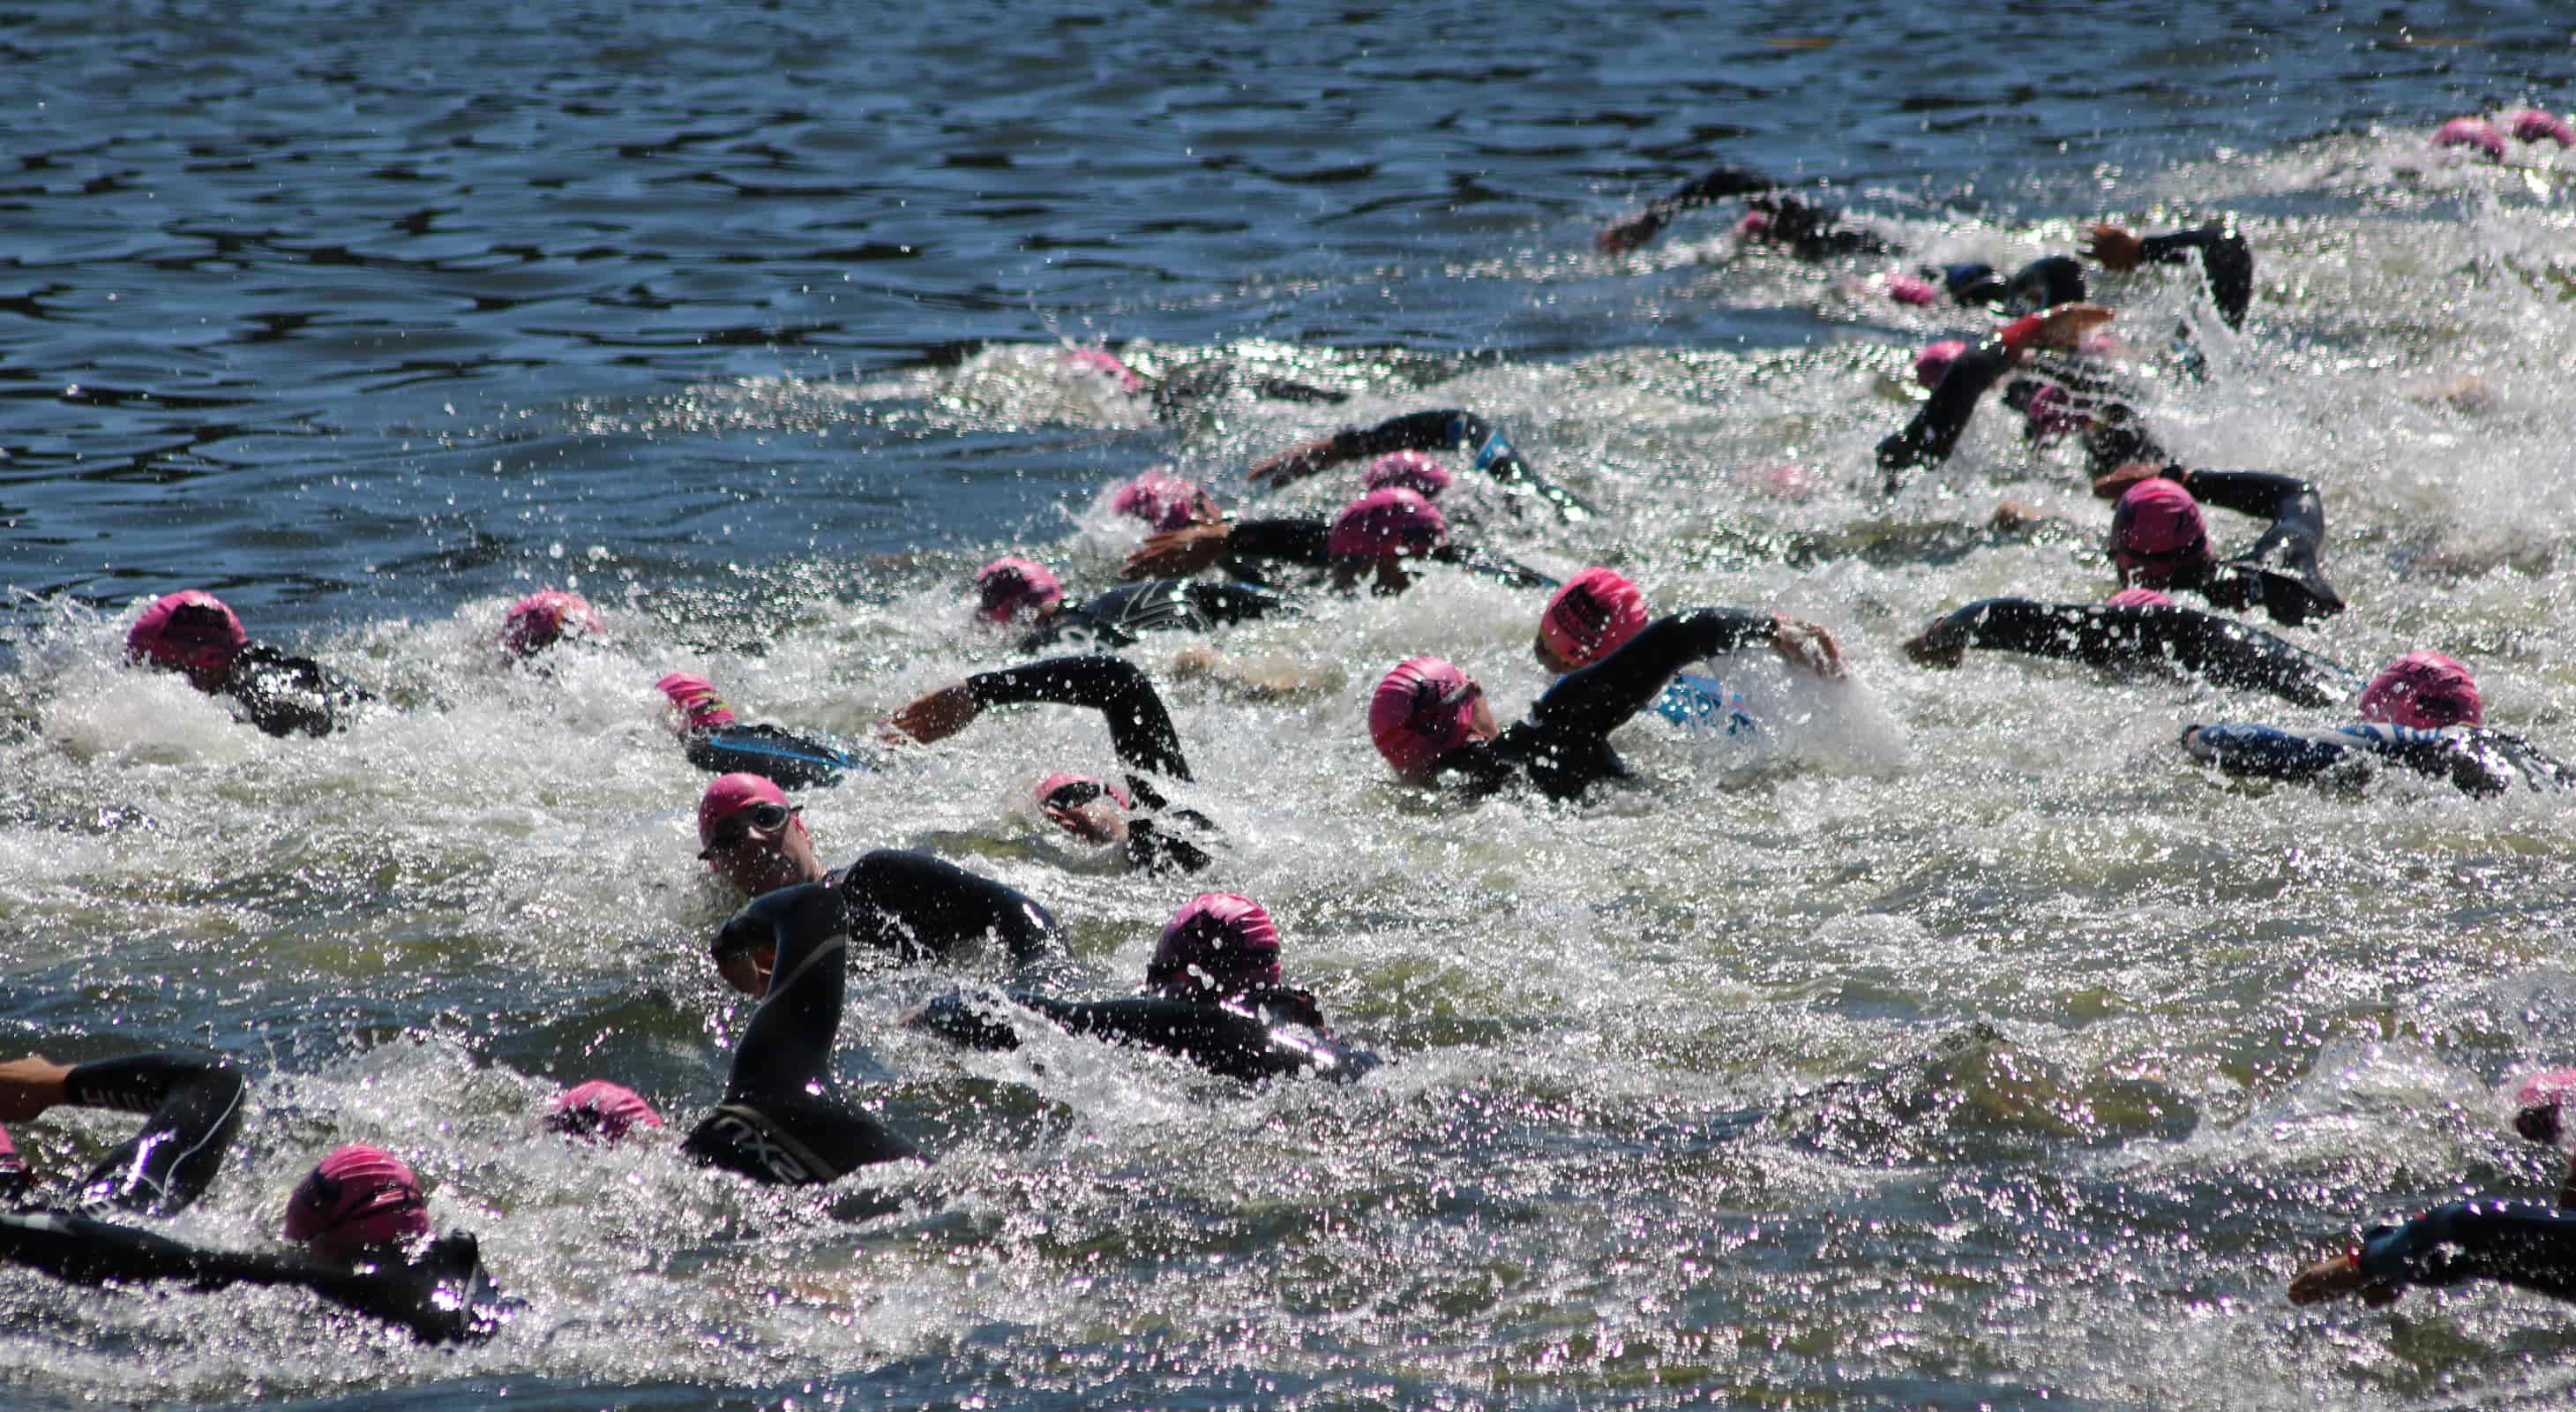 Group of swimmers in semi rough water